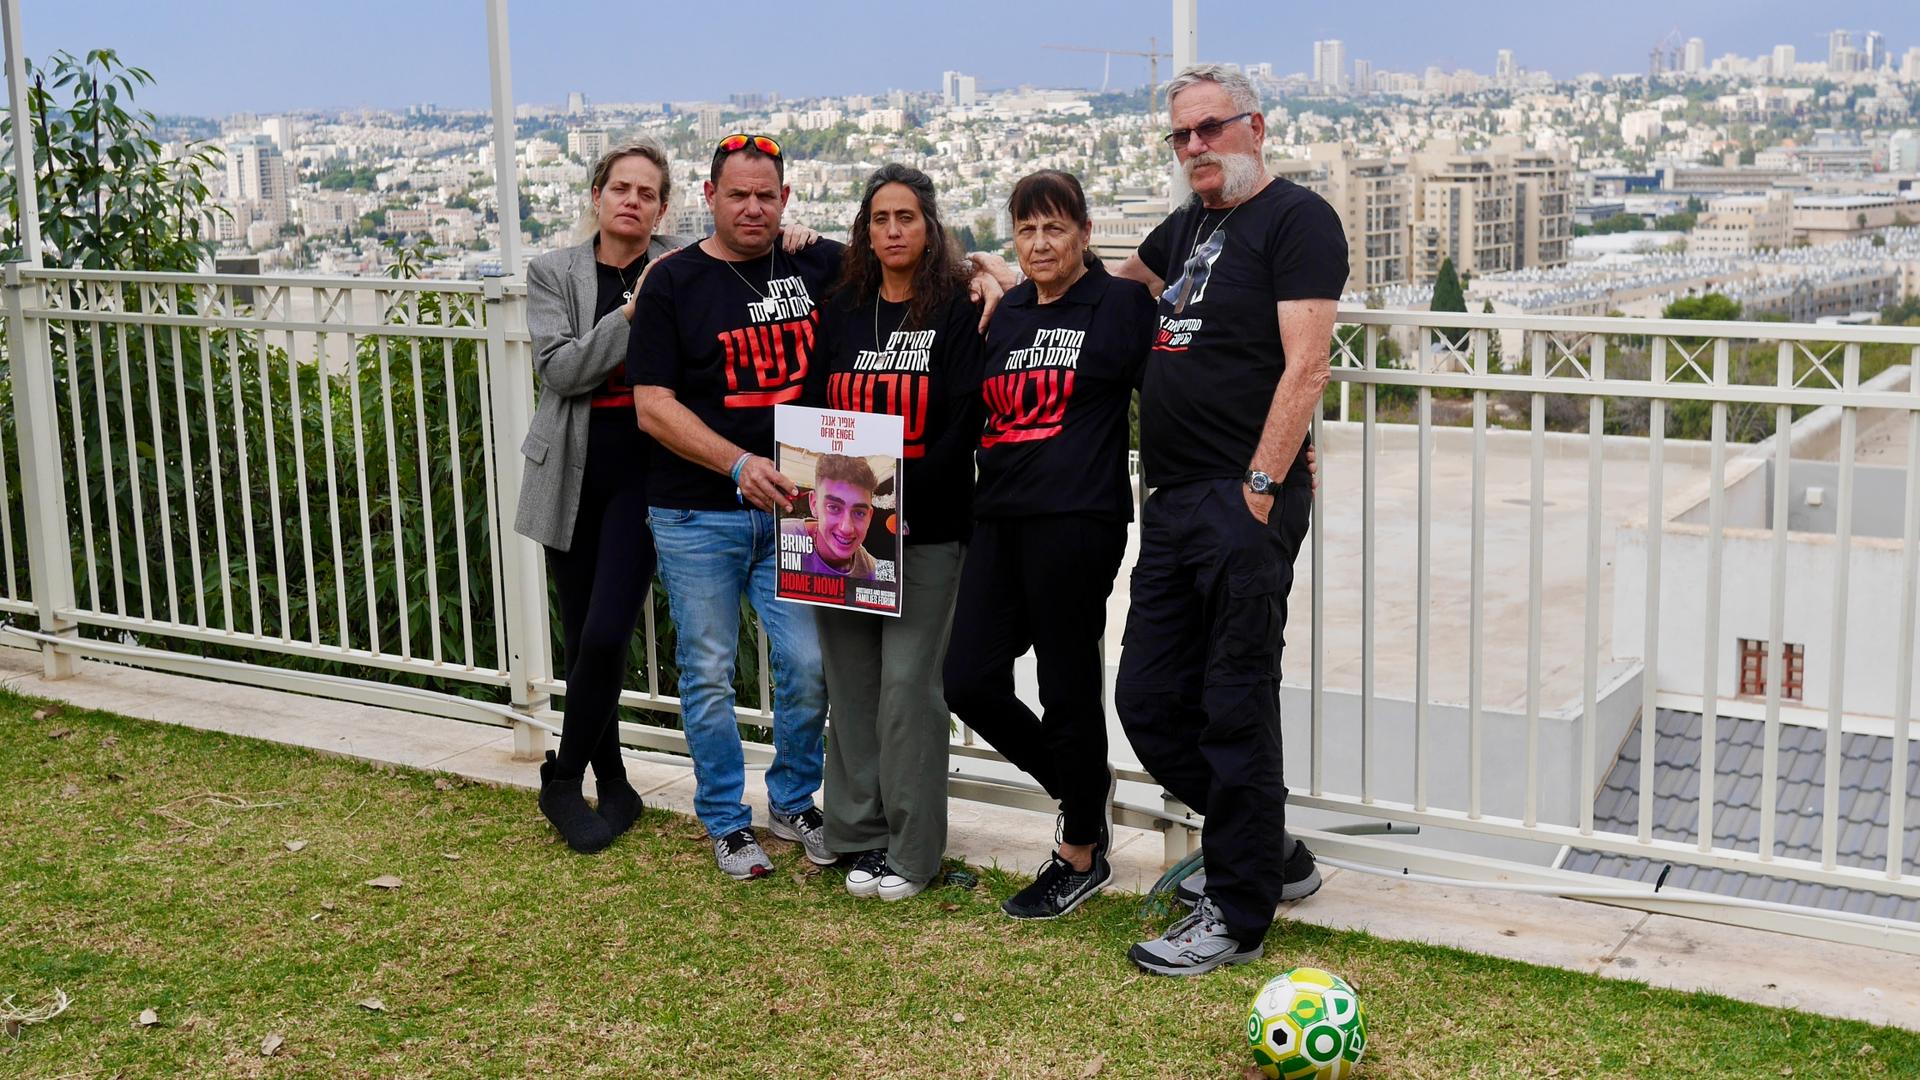 The family of Ofir Engel, from the left Yael Engel Lichi (aunt), Yoav and Sharon Engel (parents), and Yonit and Jossef Avi Yair Engel (grandparents).